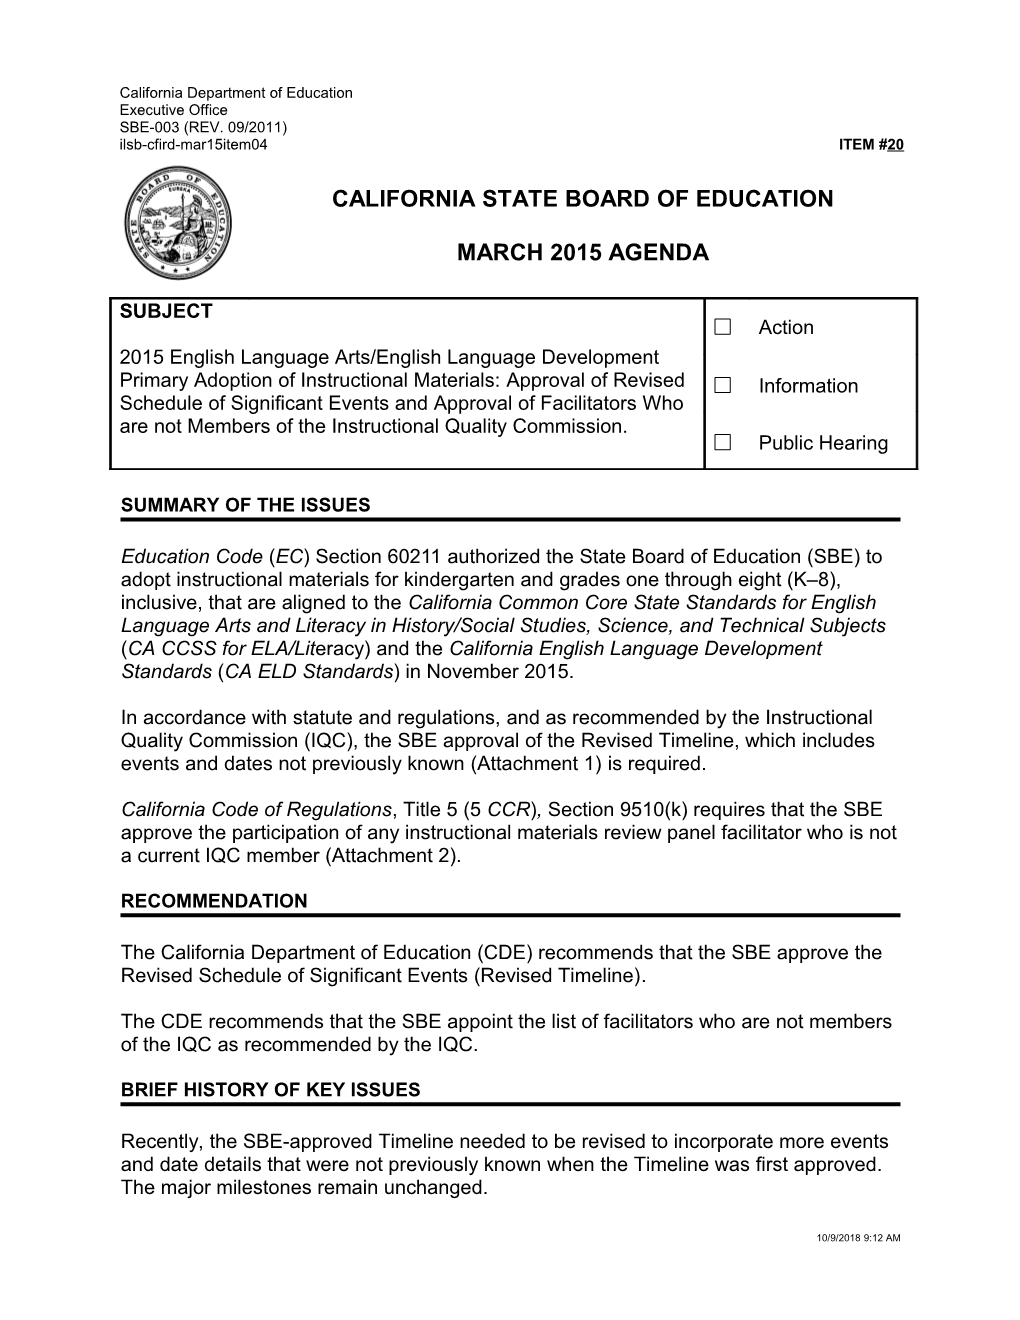 March 2015 Agenda Item 20 - Meeting Agendas (CA State Board of Education)